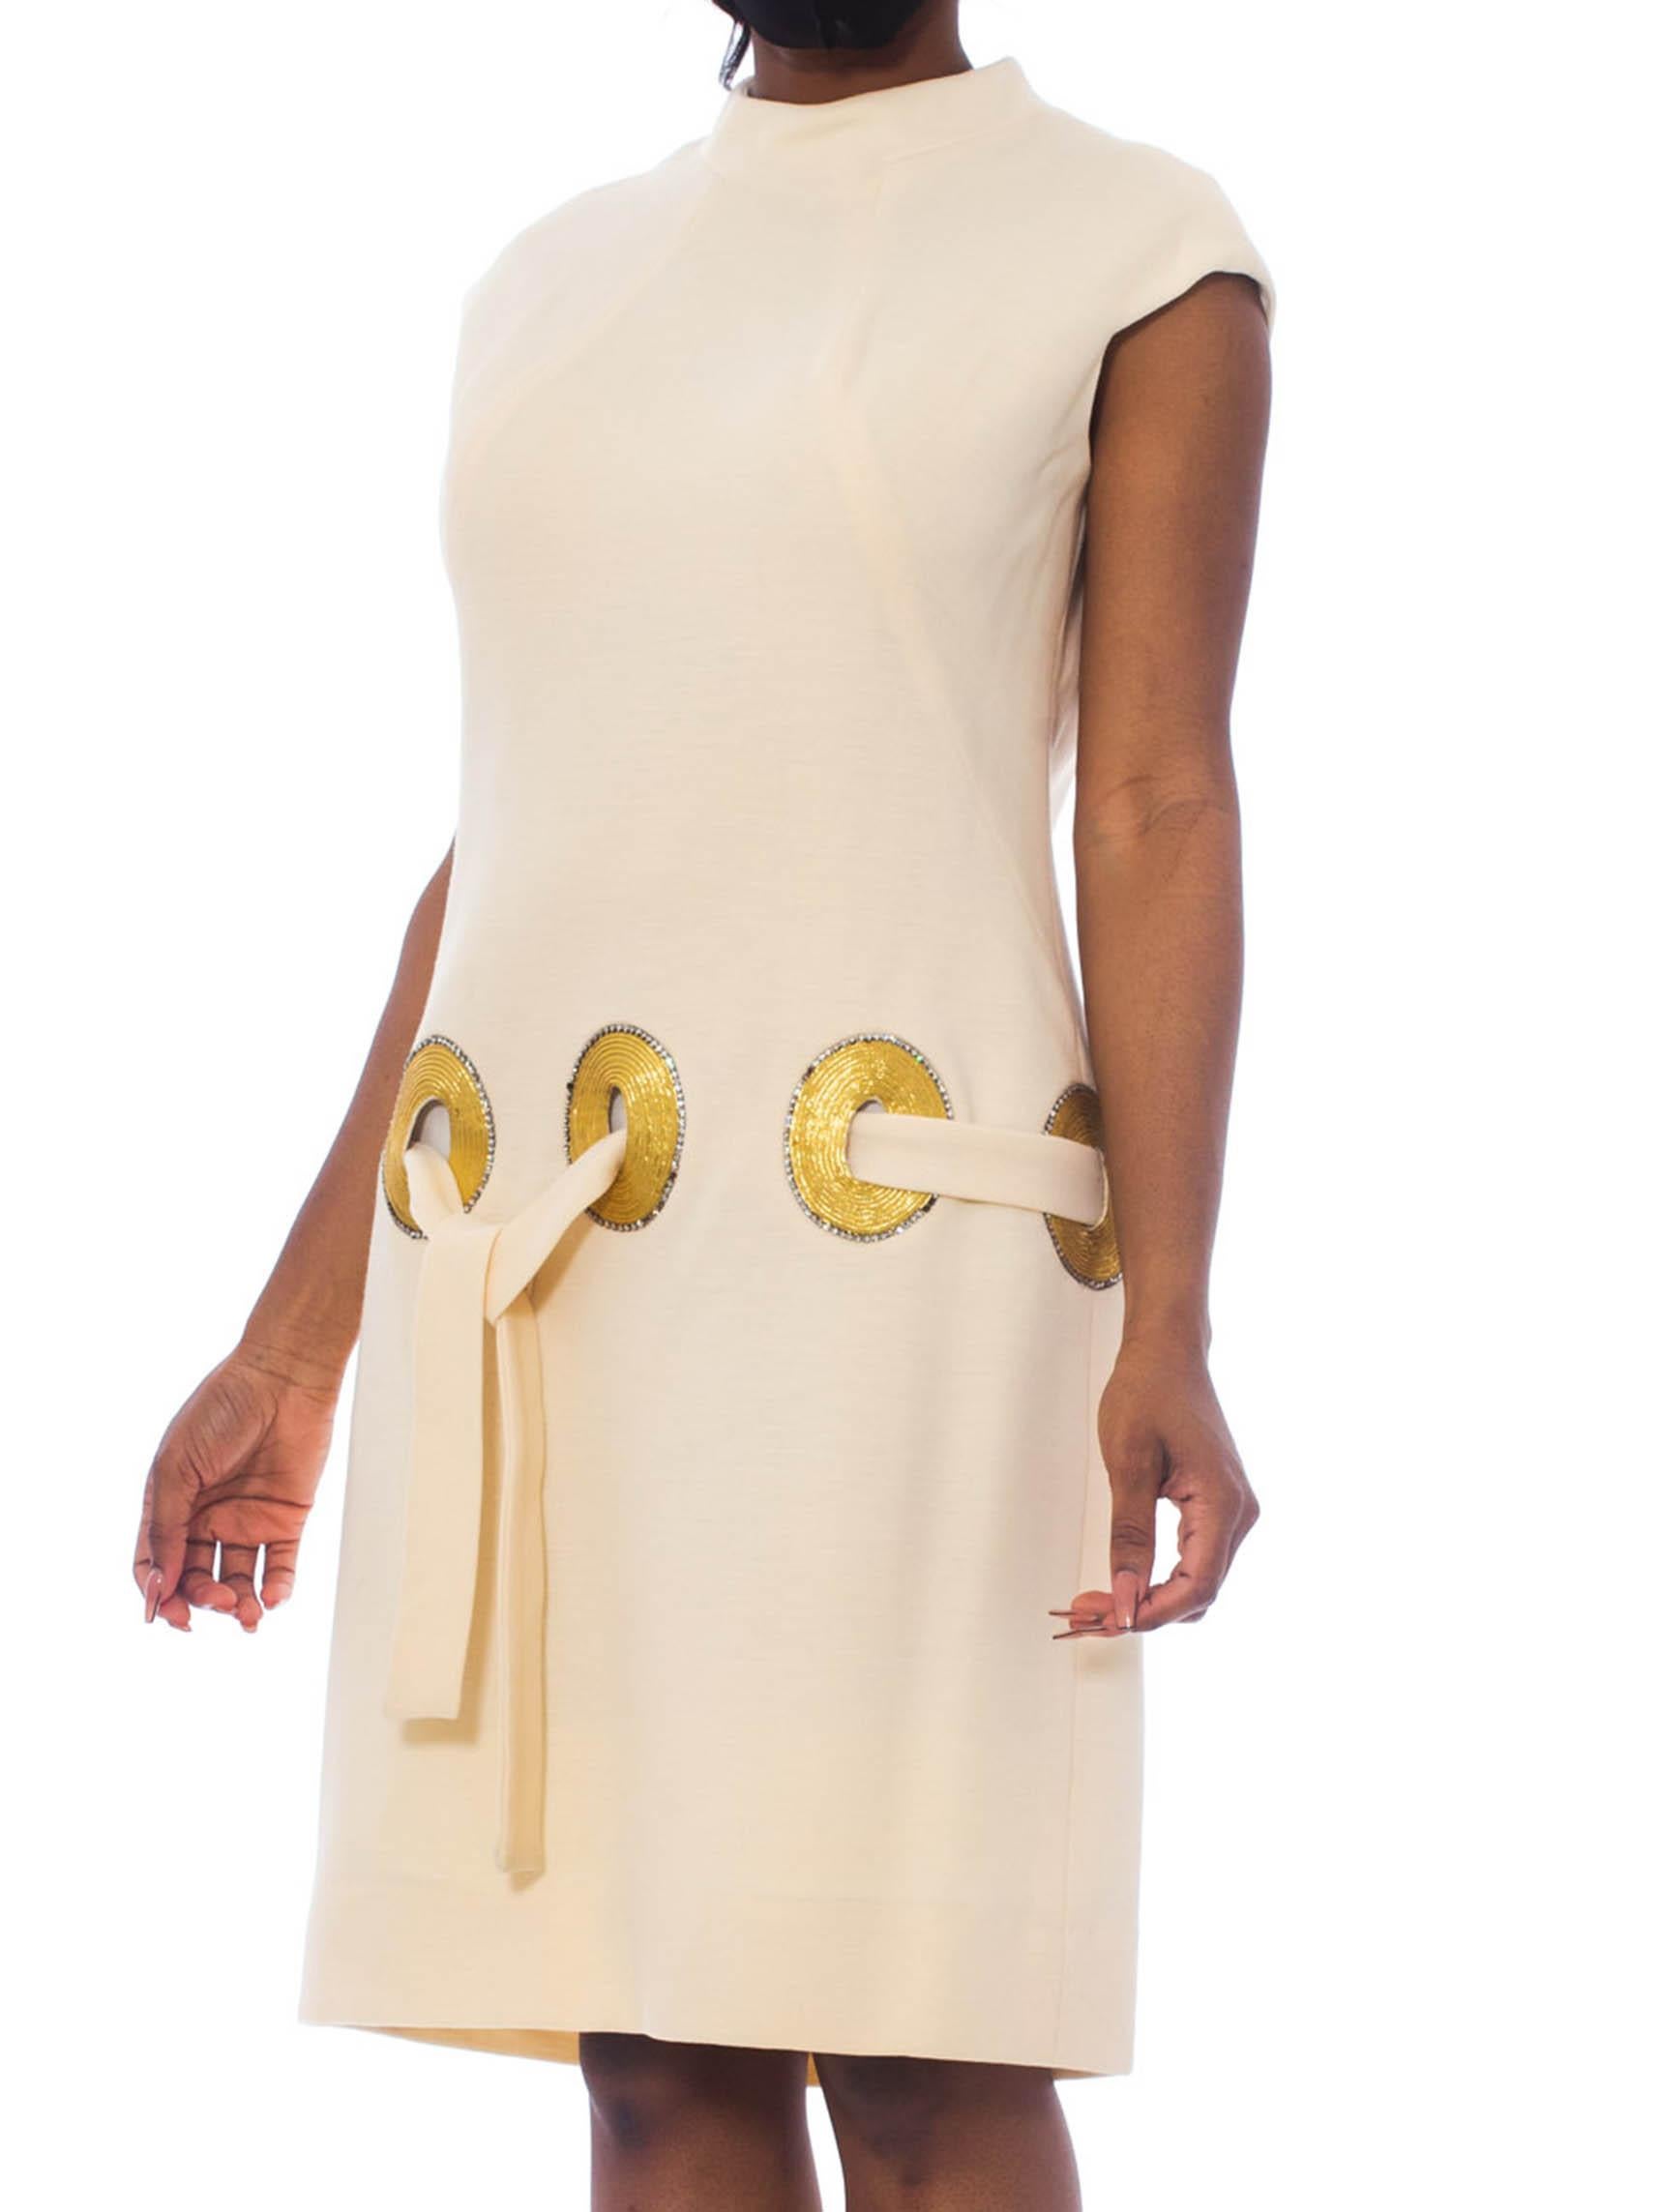 1960S SYDNEY NORTH Ivory Wool Jersey Rayon Lined Dress With Gold Braid & Crystal Details, NWT